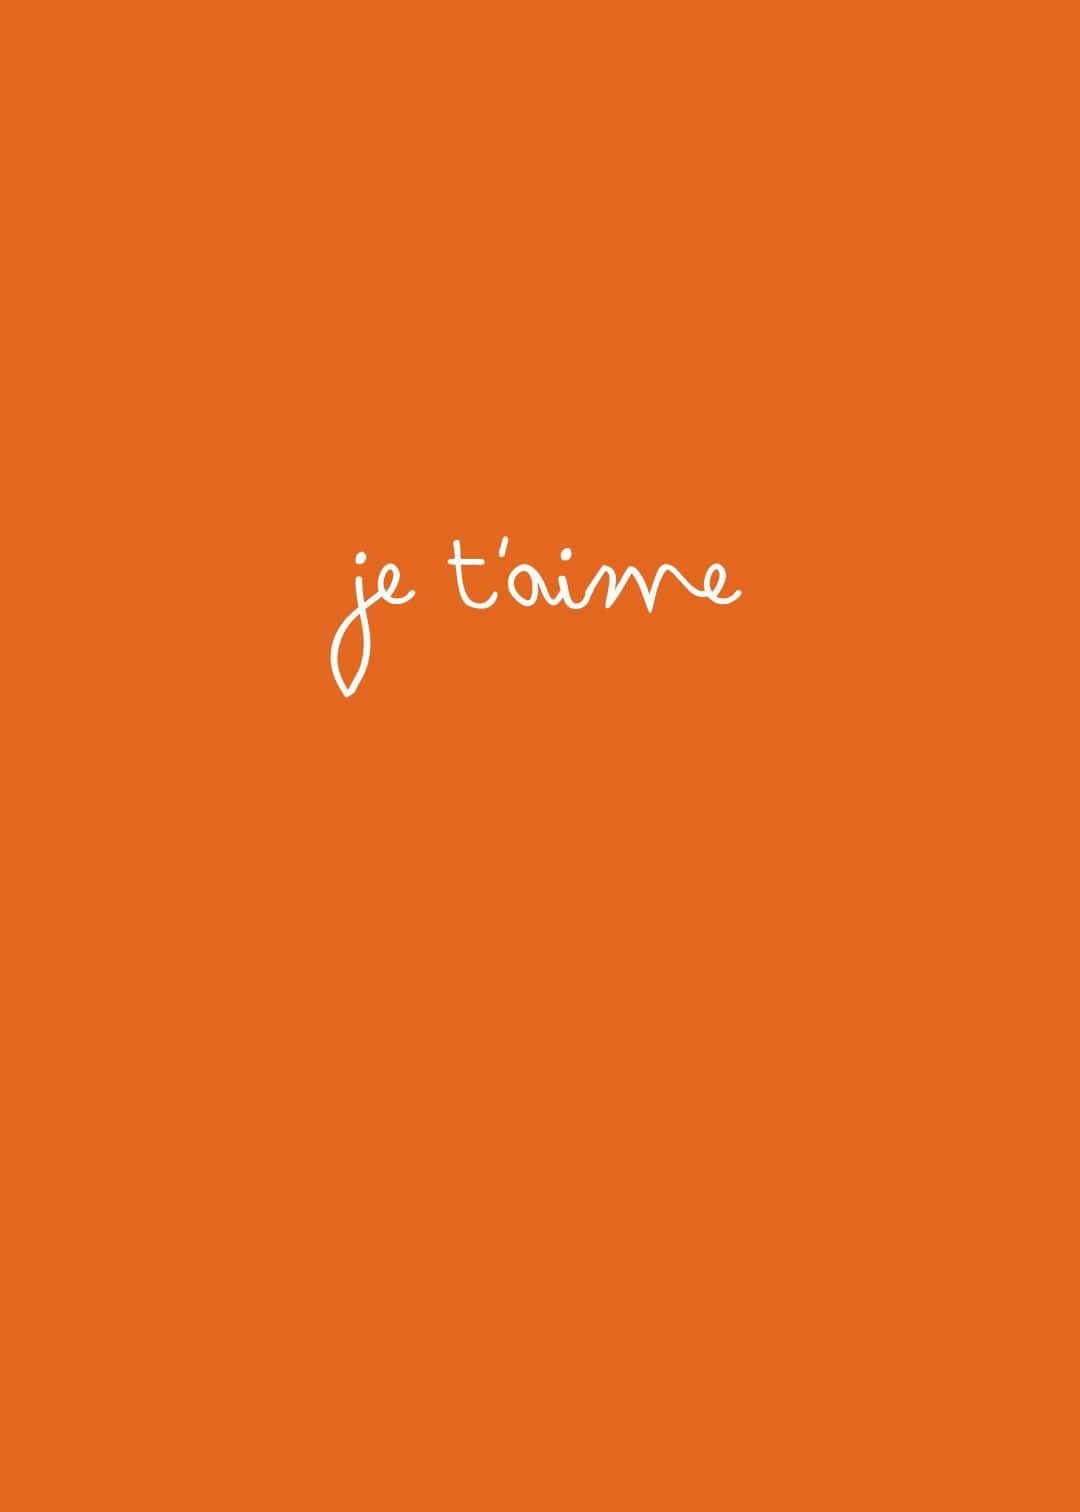 French Words On Orange Aesthetic Picture